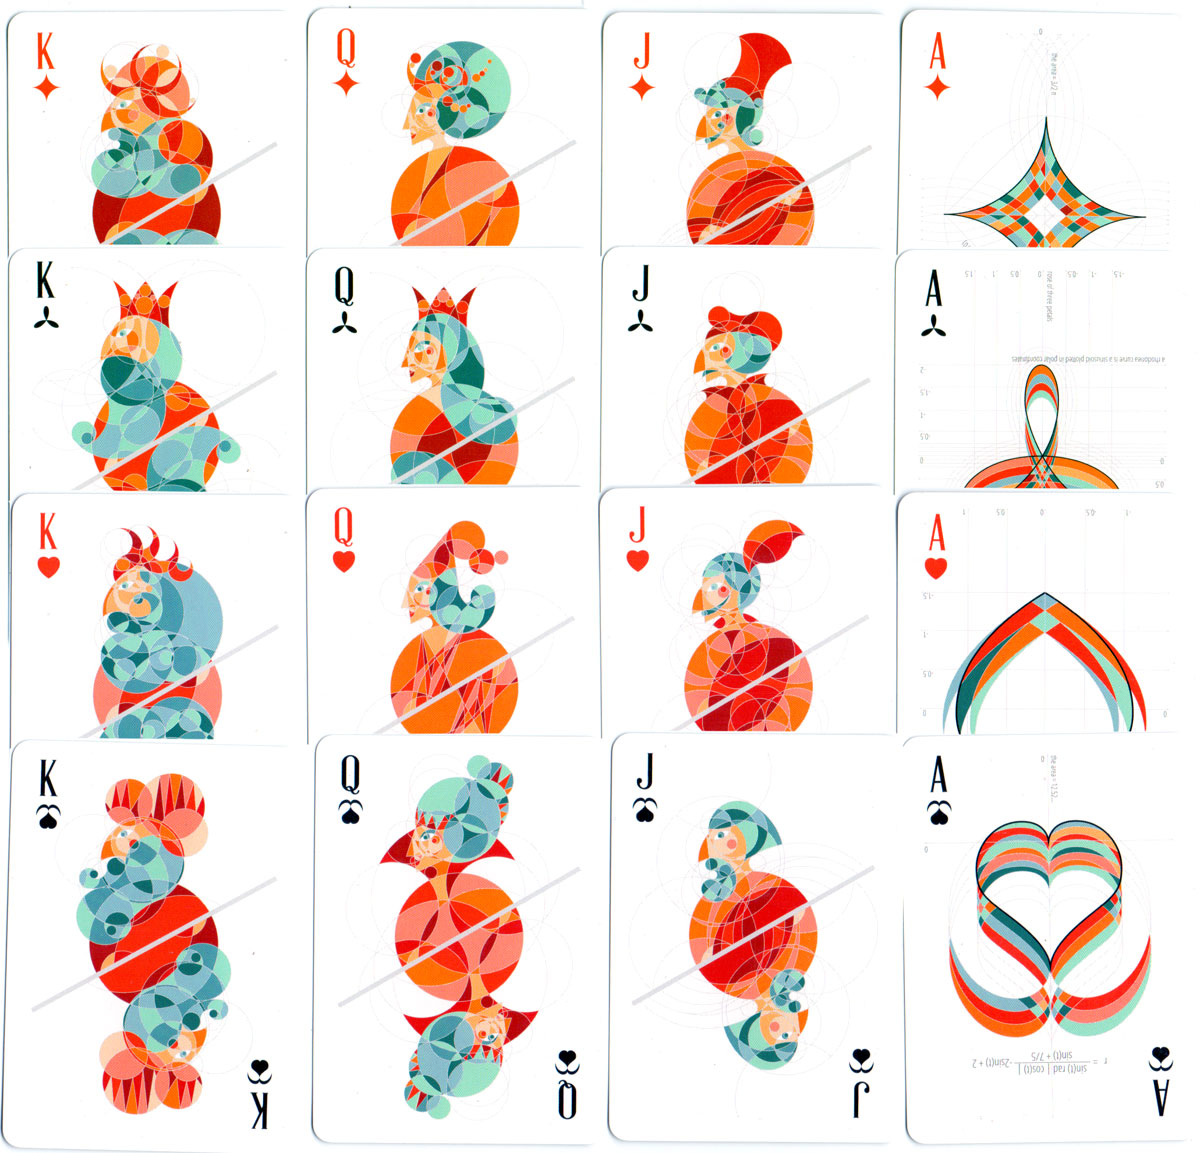 “Math Stack” playing cards designed by Diana Stanciulescu, published by EduStack, 2015